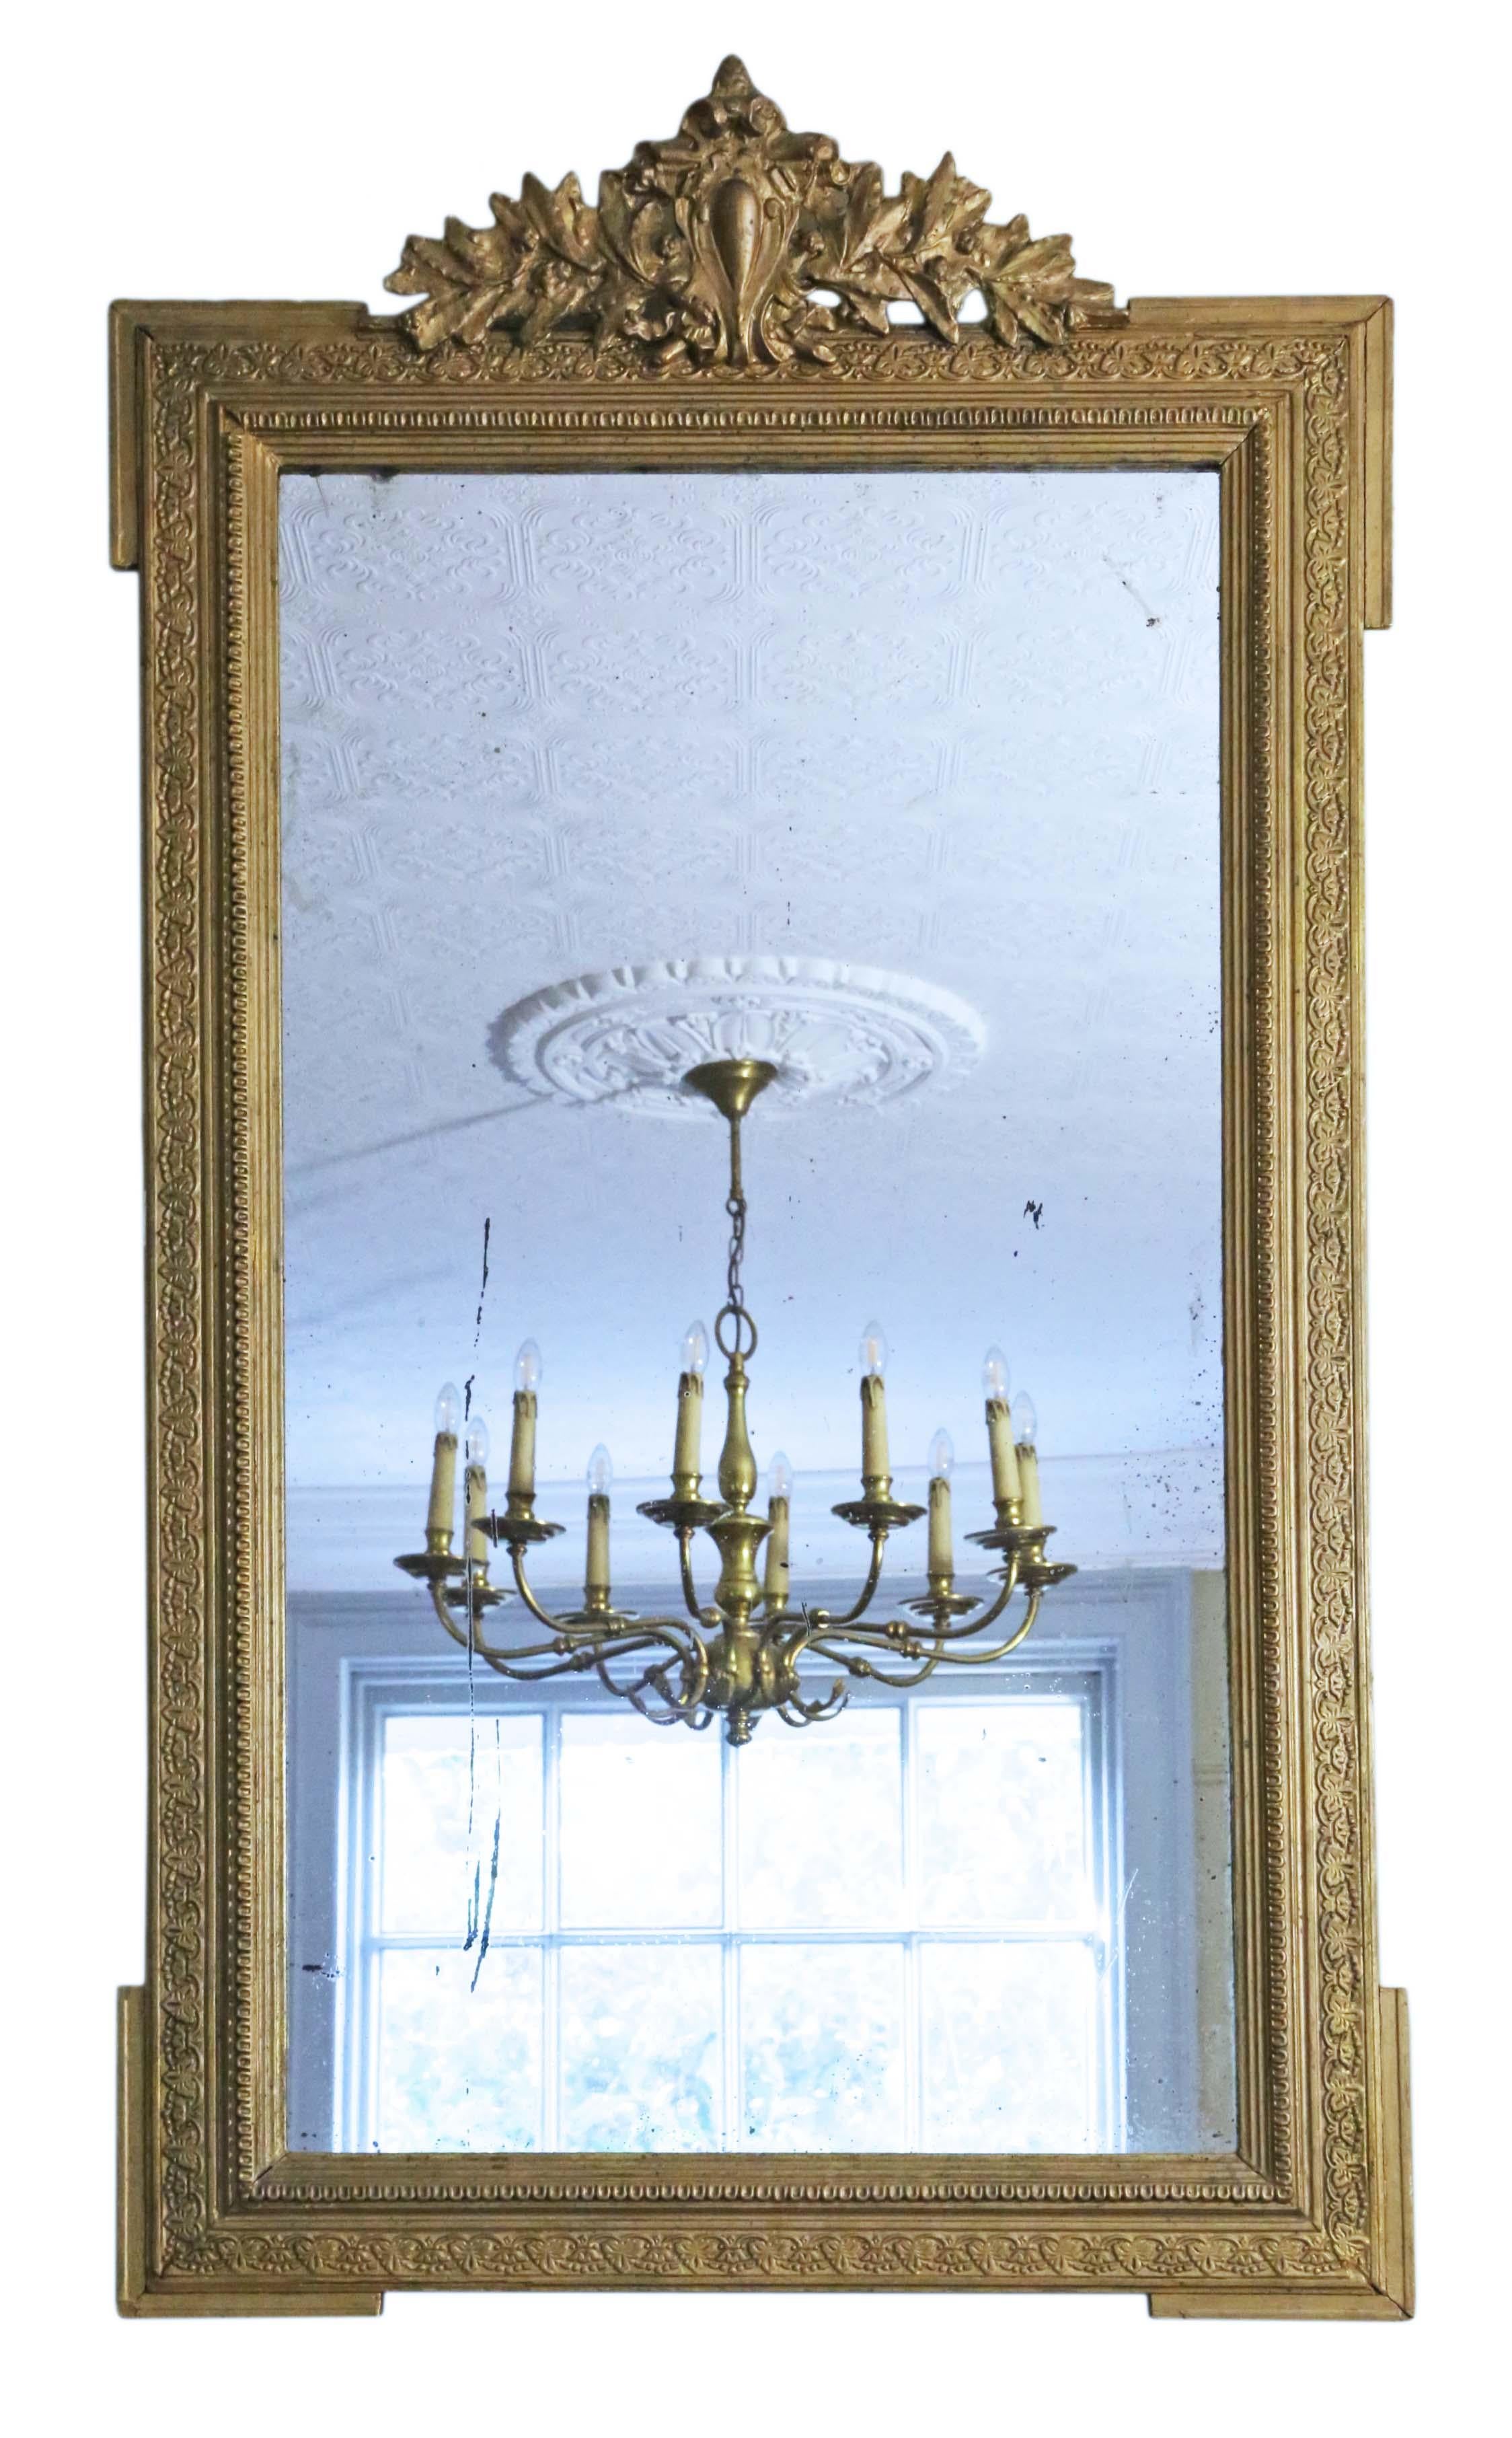 Antique rare large fine quality 19th Century gilt overmantle or wall mirror. The mirror has its original glass and back. The frame has a beautiful original gilt finish with patina, minor losses and touching up here and there.

An impressive find,